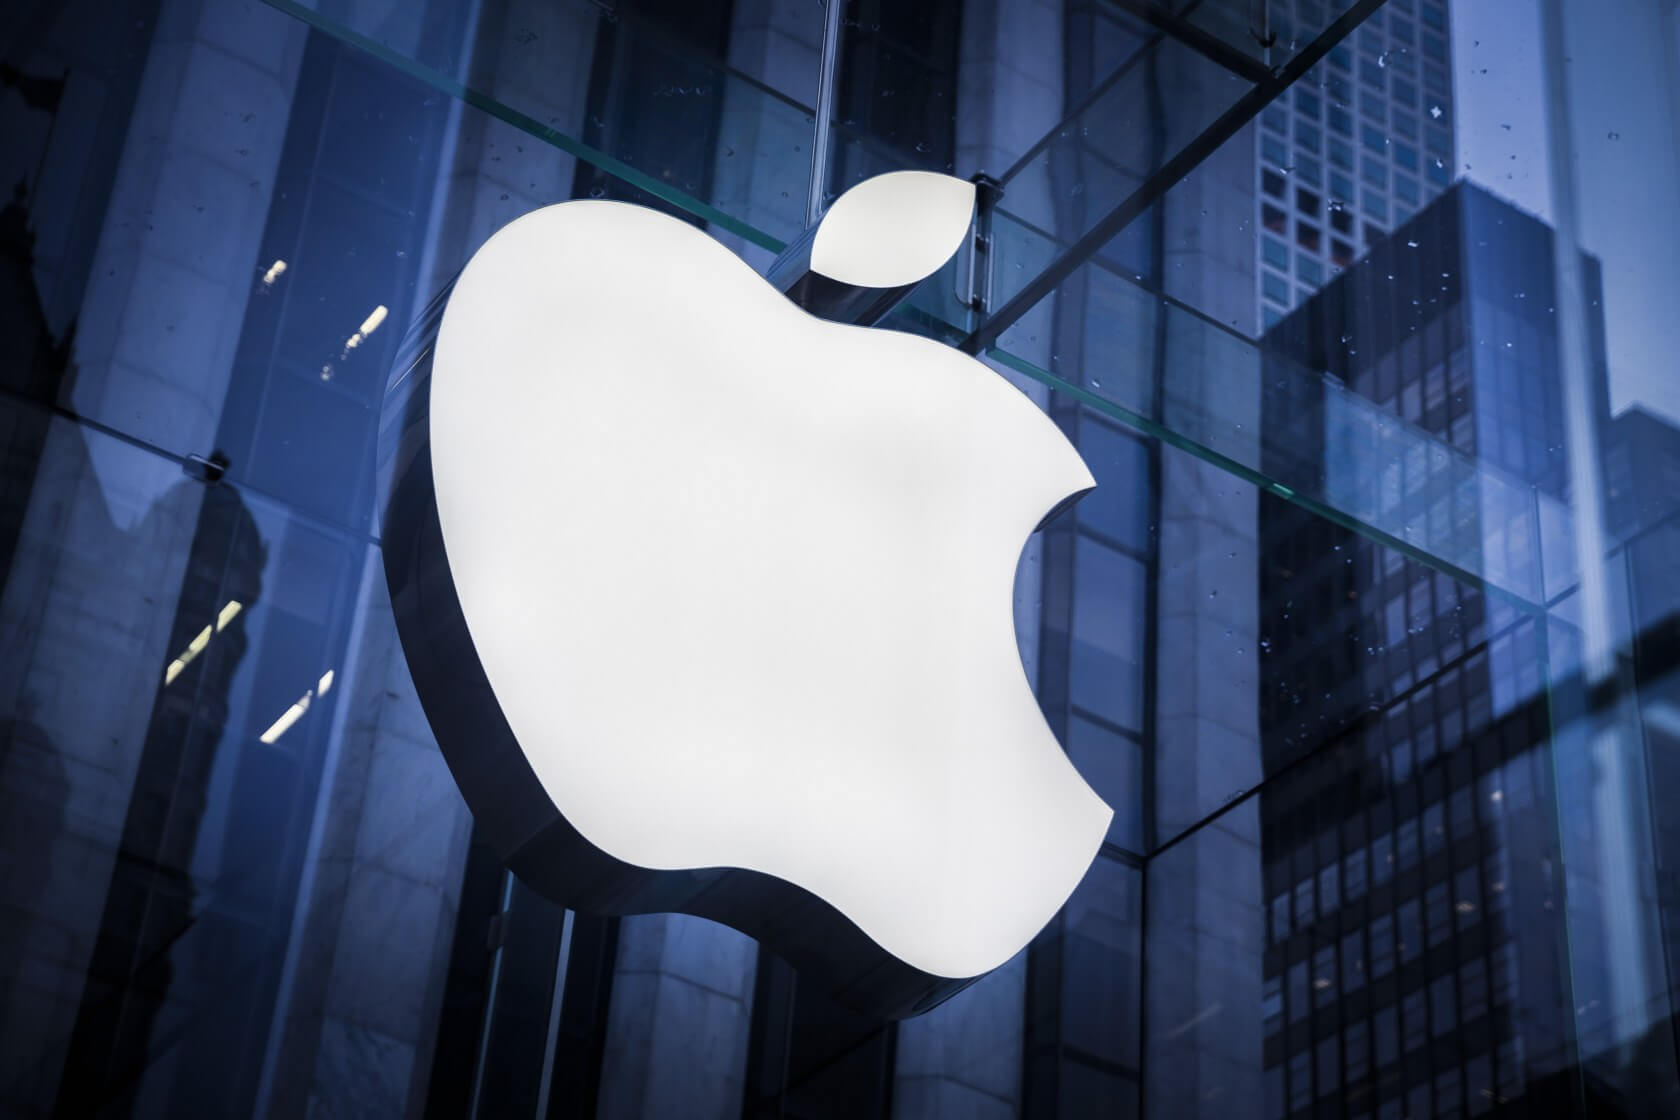 Apple supplier allegedly employs and overworks high school students